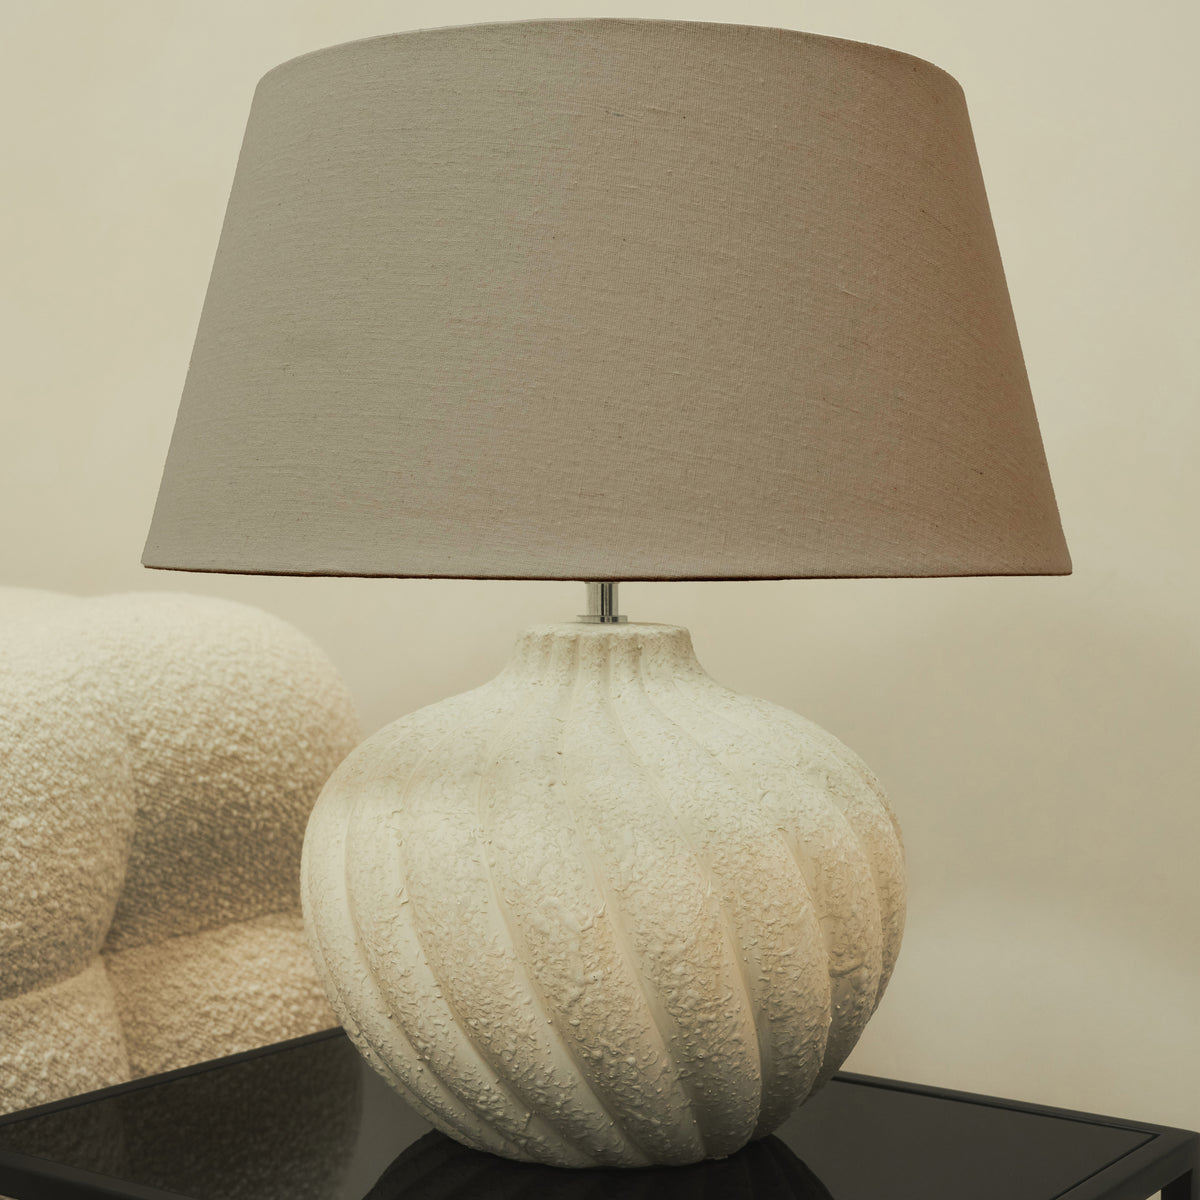 Textured ceramic based table lamp beige shade